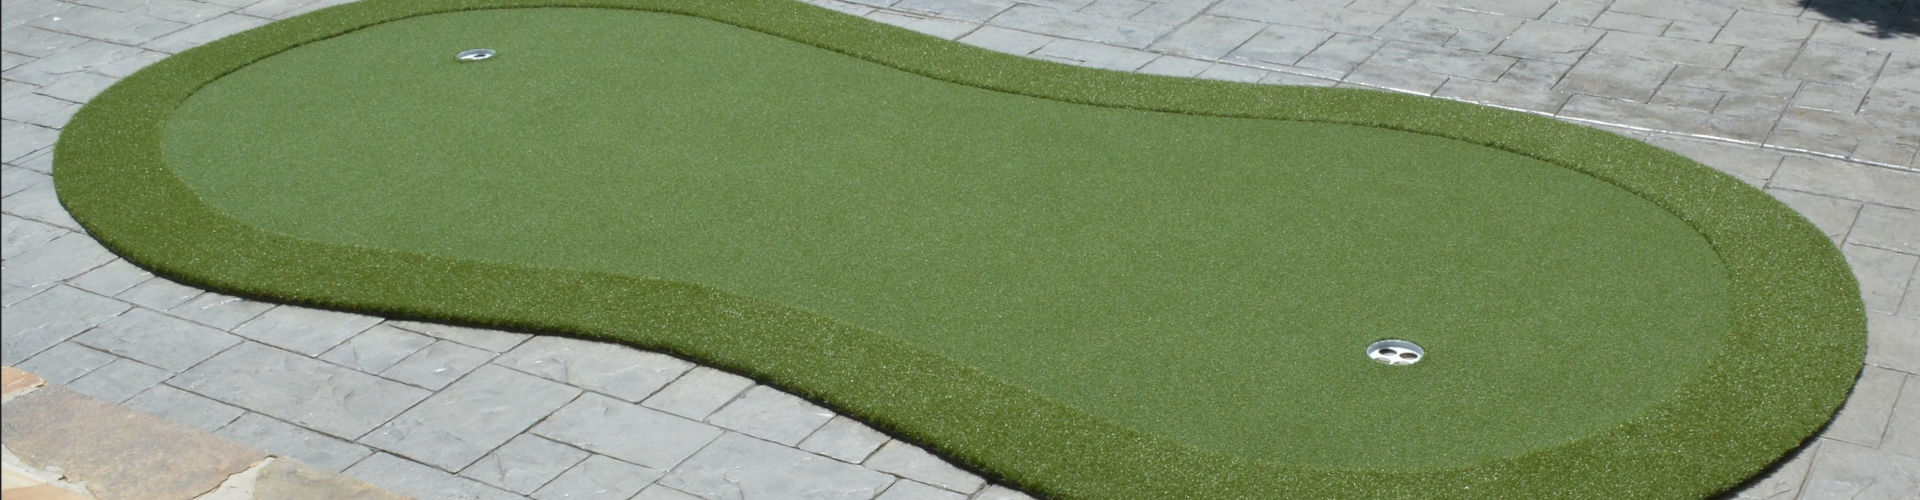 Southwest Greens Vancouver (Second Generation Landscapes) Portable Putting Green